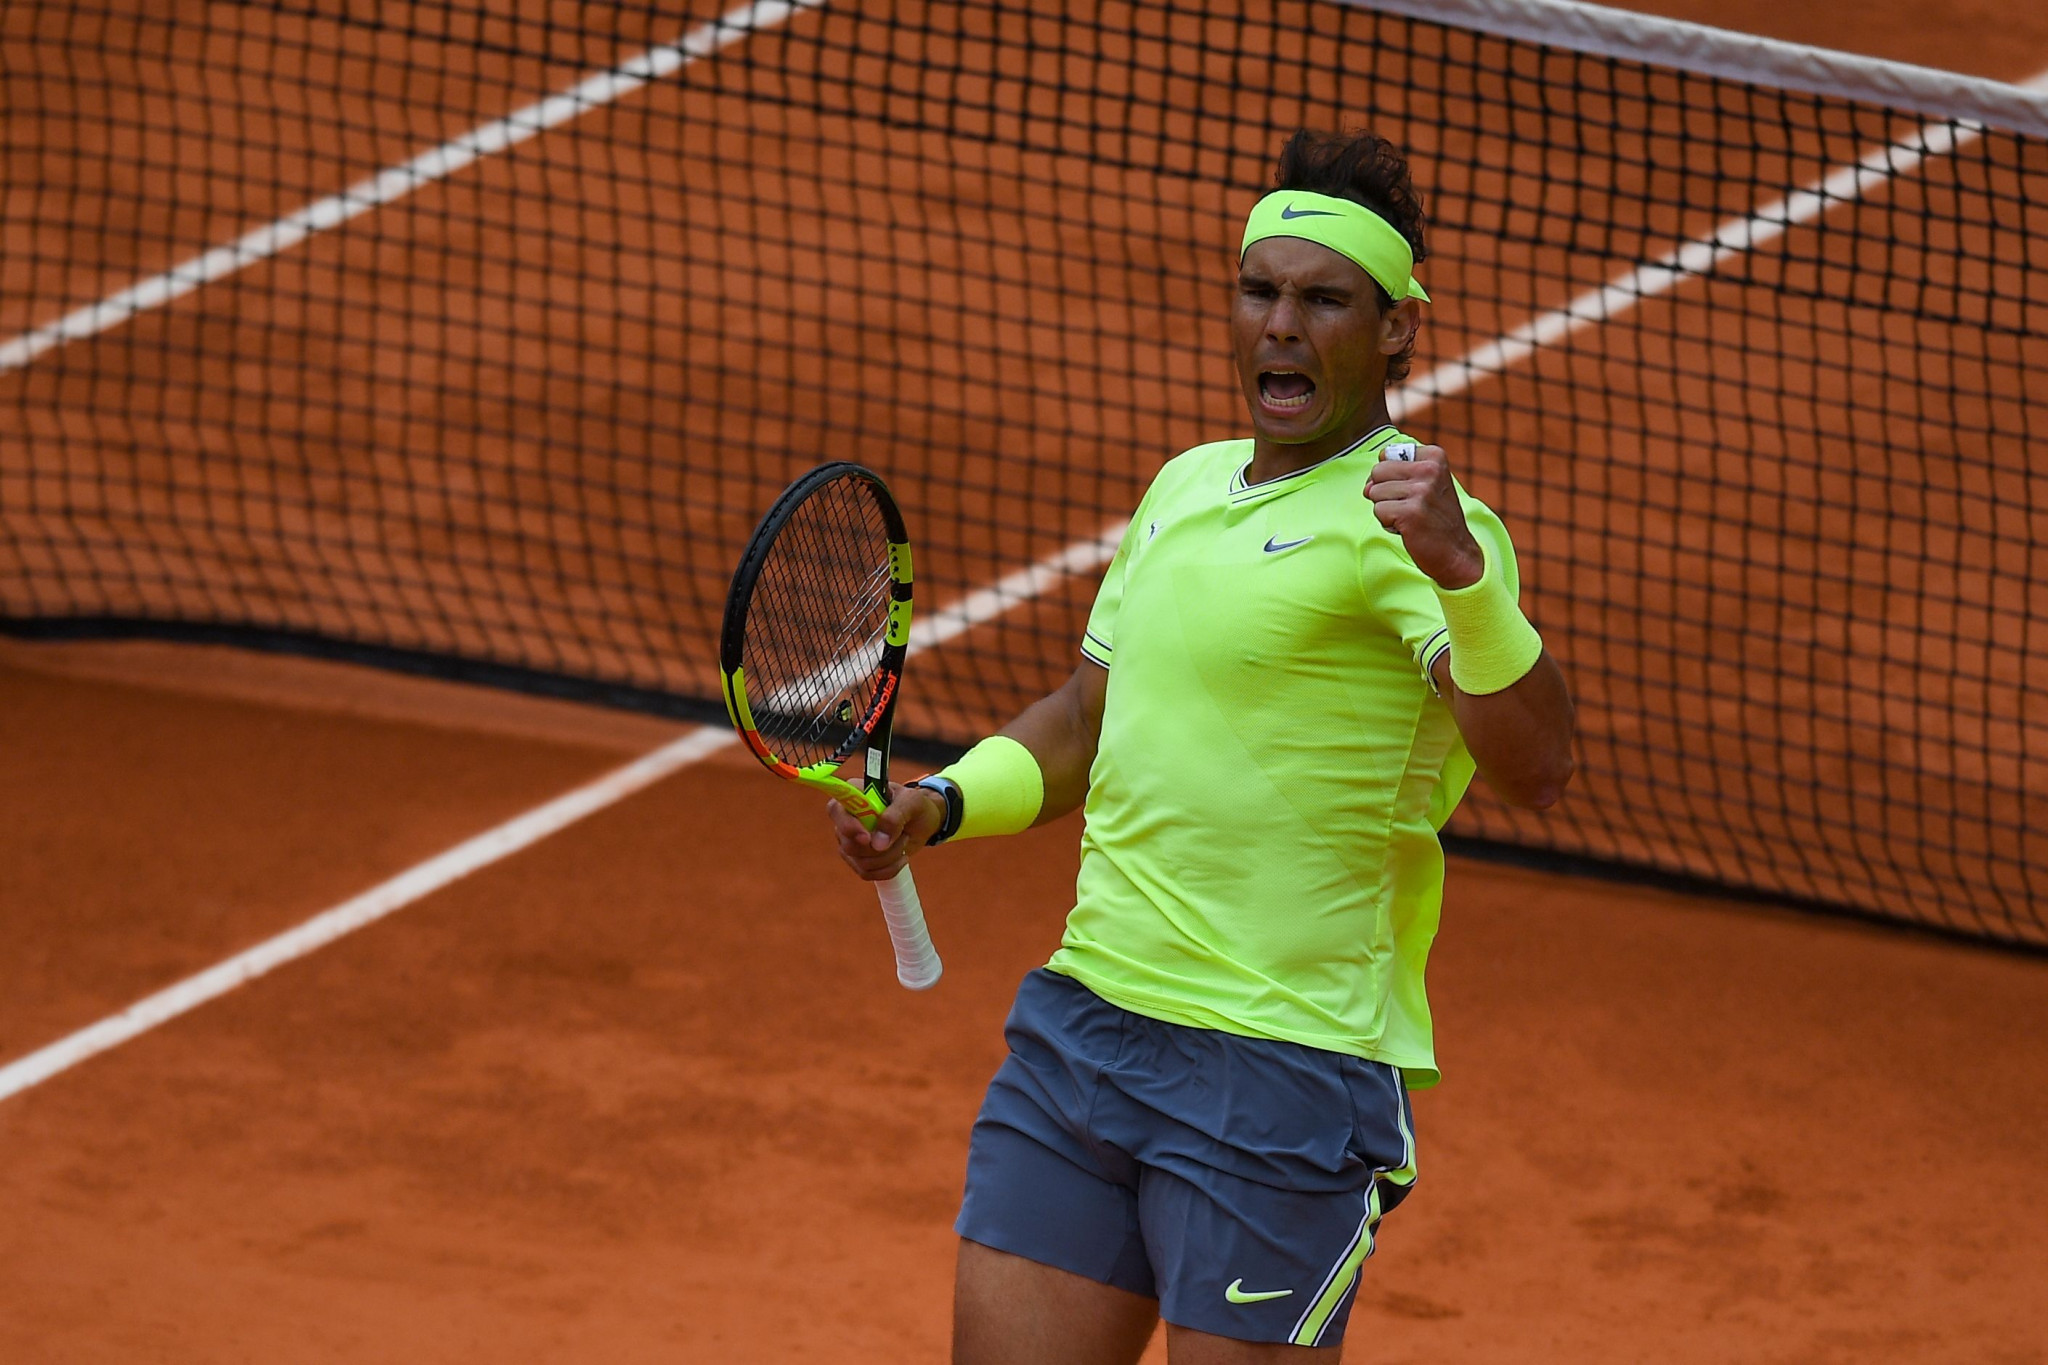 Nadal sweeps aside Federer to book 12th French Open final berth